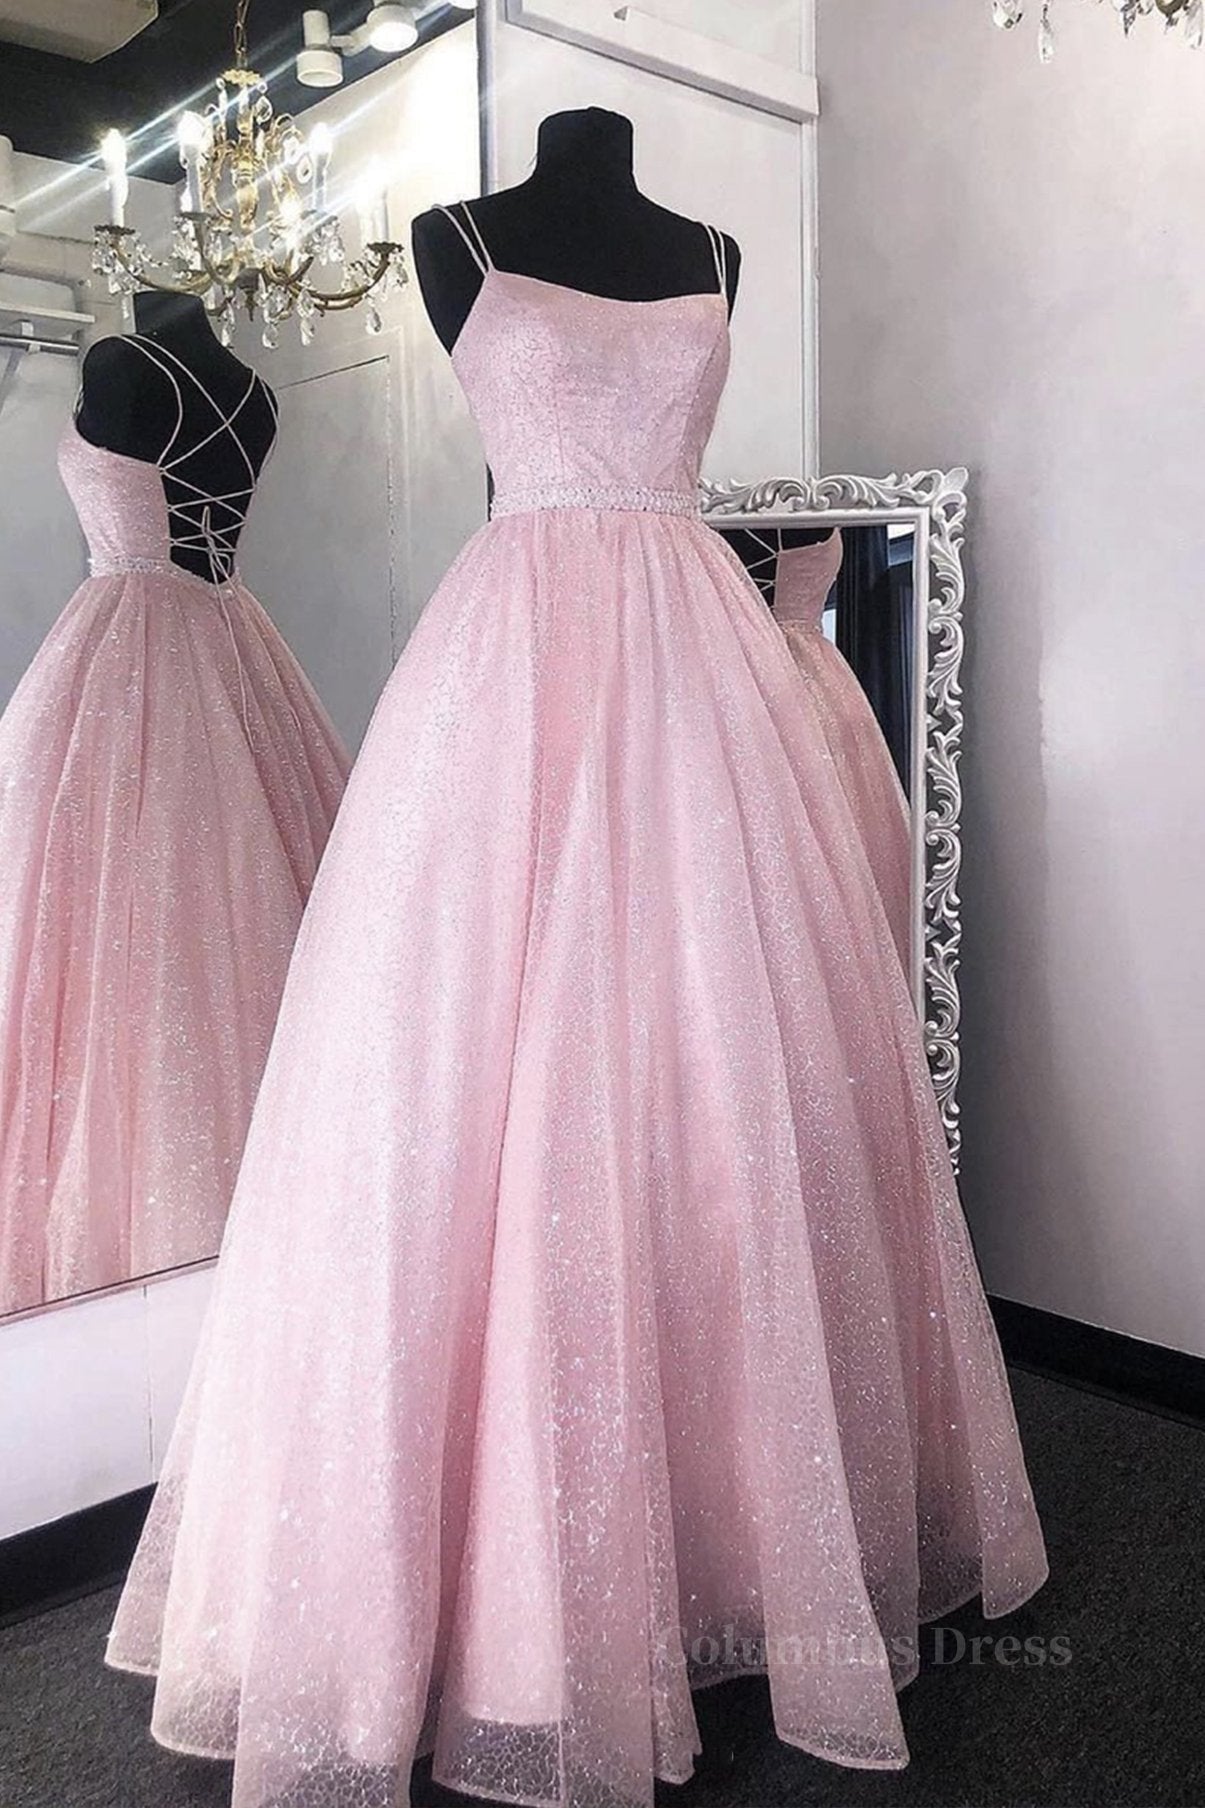 Prom Dress Tight, Pink tulle sequin long prom dress pink tulle formal dress